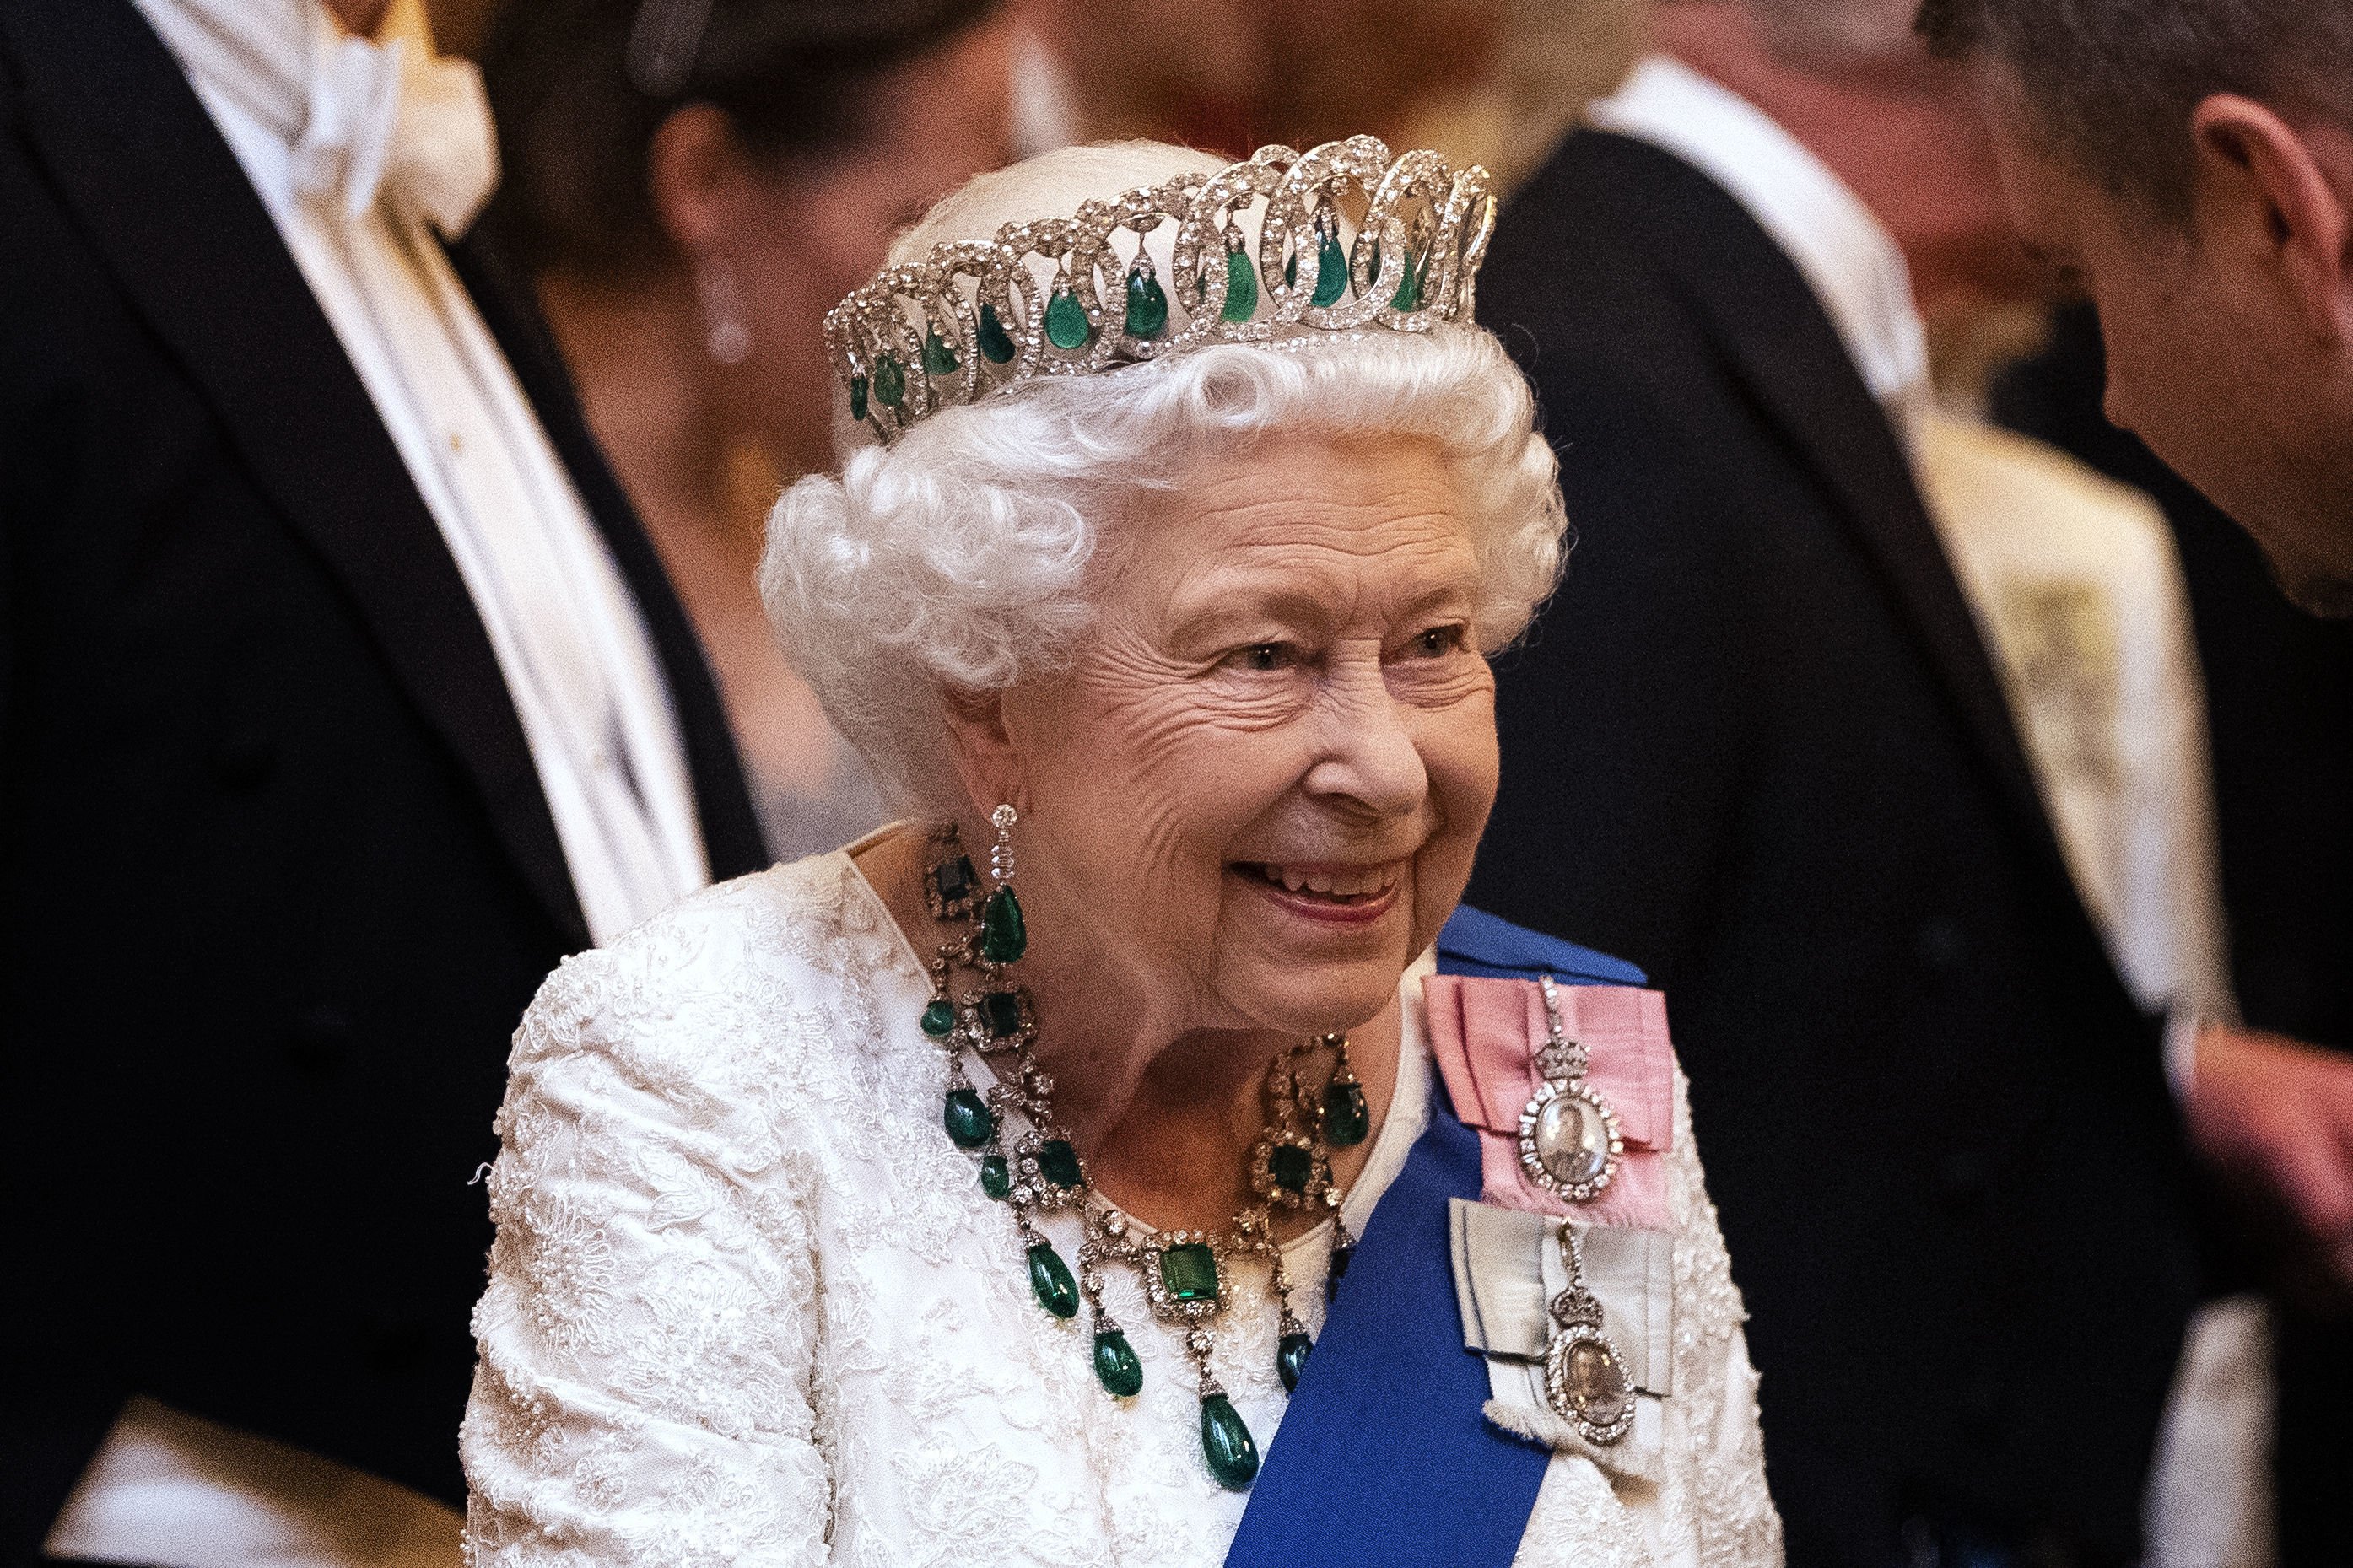 Queen Elizabeth II speaks to guests at an evening reception for members of the Diplomatic Corps at Buckingham Palace on December 11, 2019 in London, England.  |  Source: Getty Images